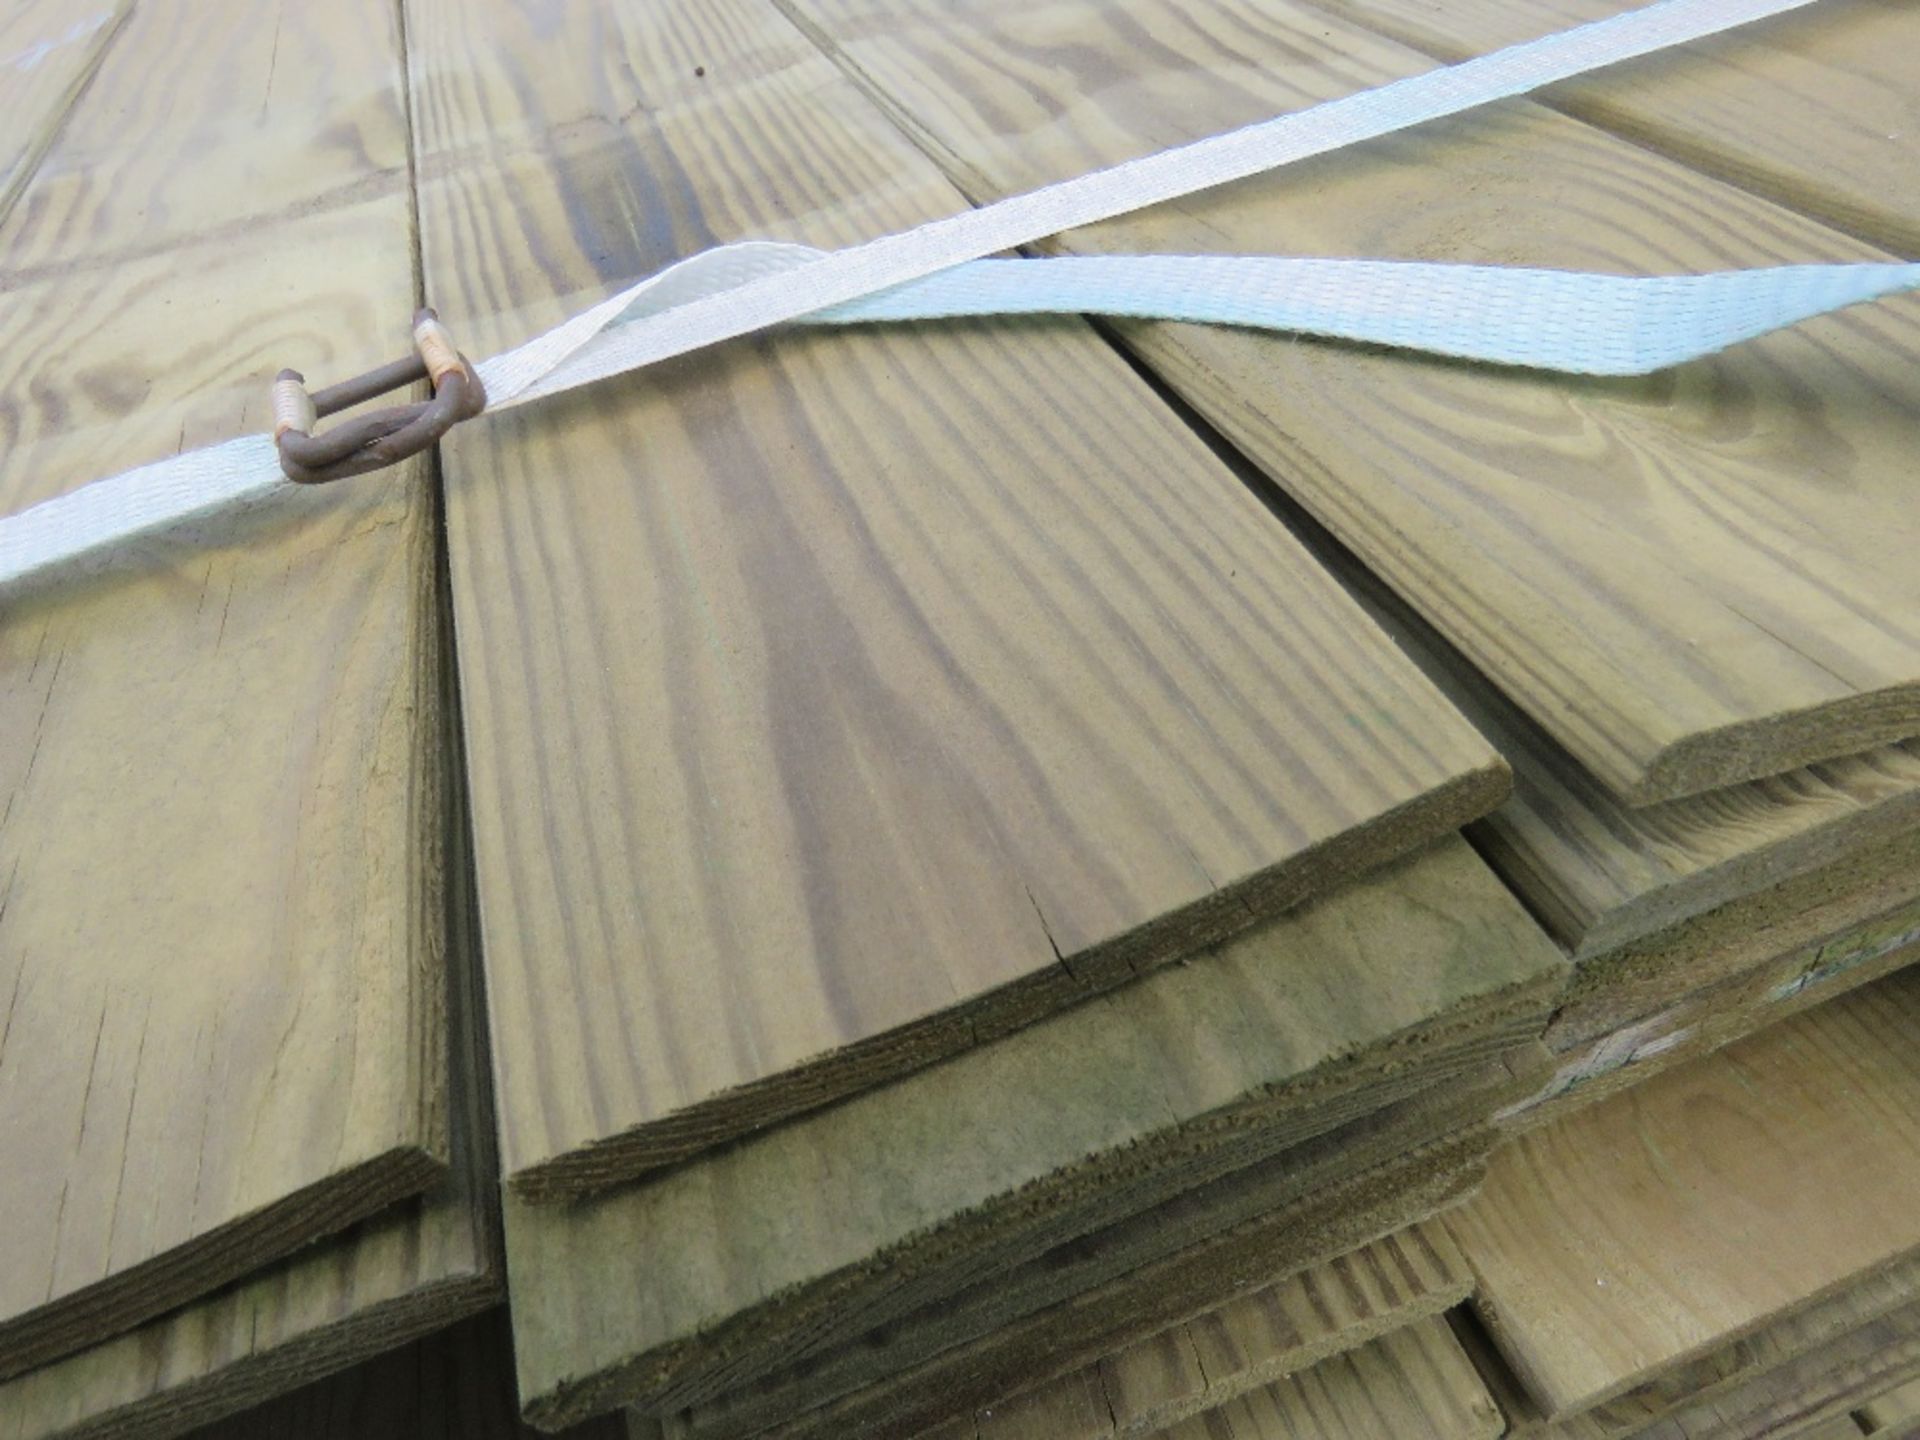 LARGE PACK FLAT MACHINED FINISH CLADDING TIMBER BOARDS 1.74M X 9.5CM APPROX, PRESSURE TREATED. - Image 3 of 3